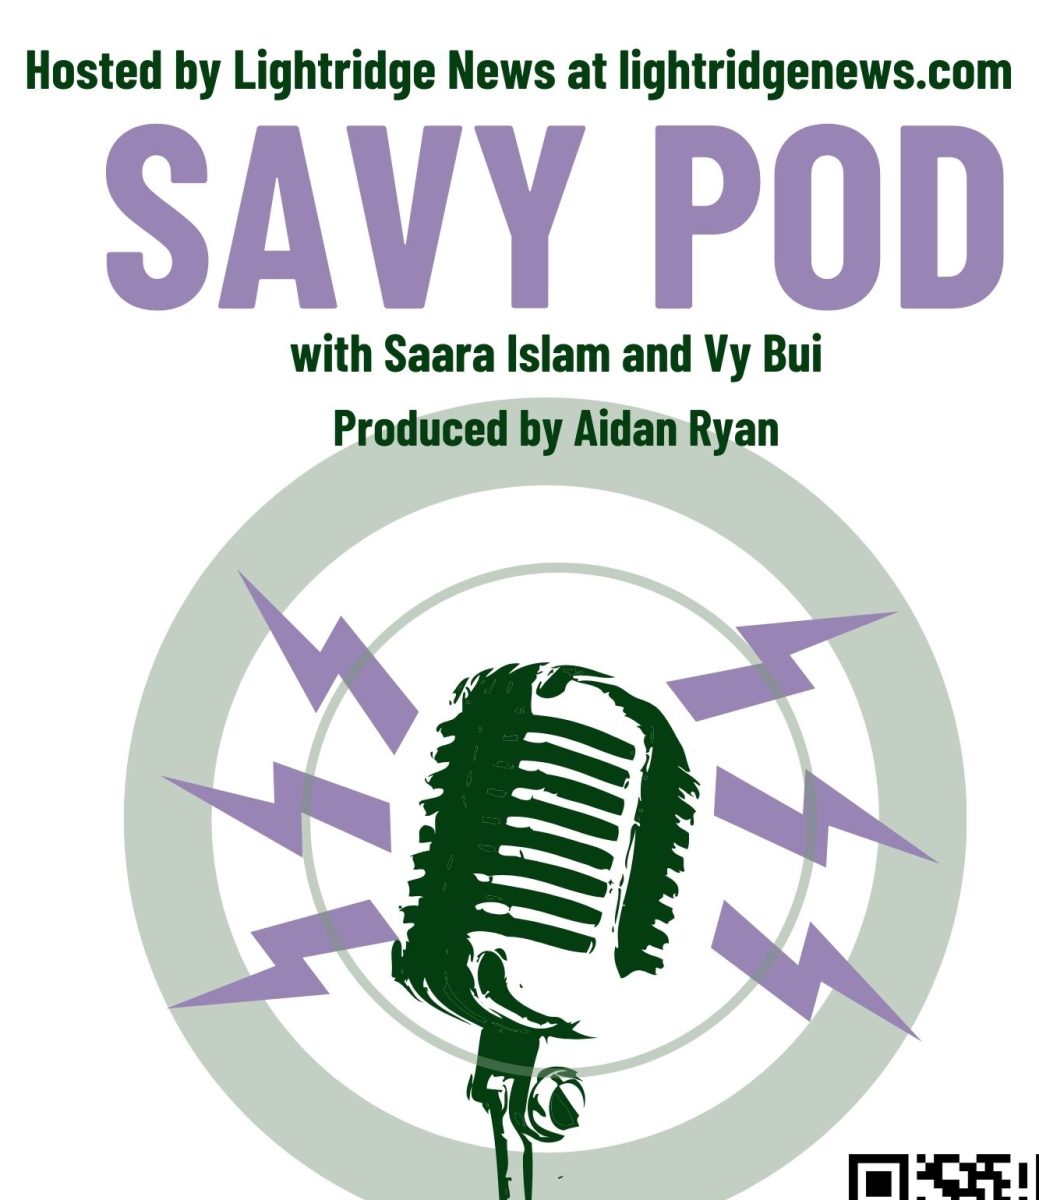 The Savy Pod is on its way